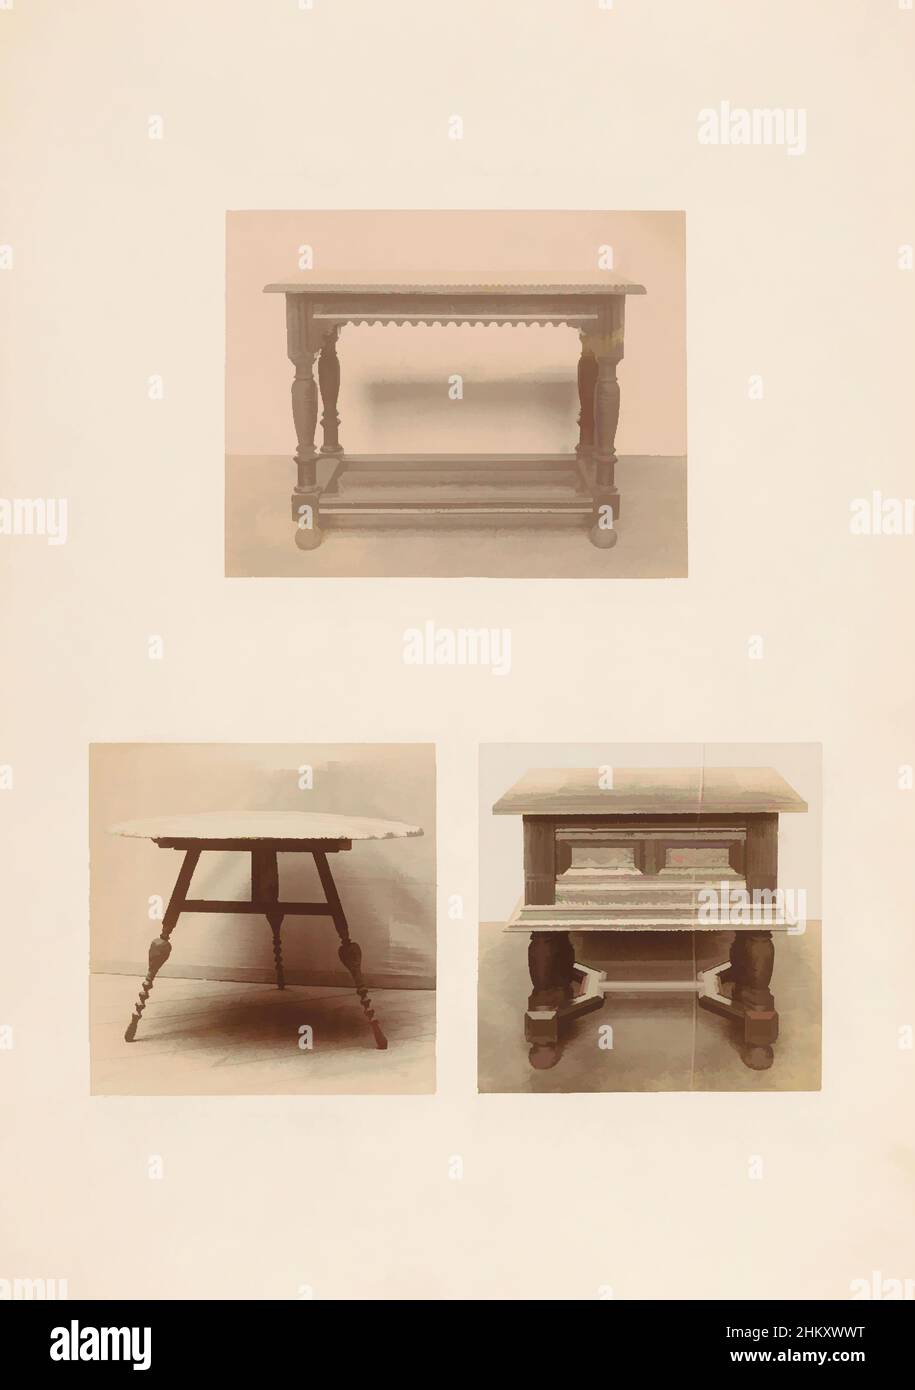 Art inspired by Overview of three wooden tables, Above a walnut table, below left a three-legged Hindelooper table, below right an oak money table., Netherlands, c. 1875 - c. 1900, cardboard, photographic support, height 446 mm × width 315 mm, Classic works modernized by Artotop with a splash of modernity. Shapes, color and value, eye-catching visual impact on art. Emotions through freedom of artworks in a contemporary way. A timeless message pursuing a wildly creative new direction. Artists turning to the digital medium and creating the Artotop NFT Stock Photo